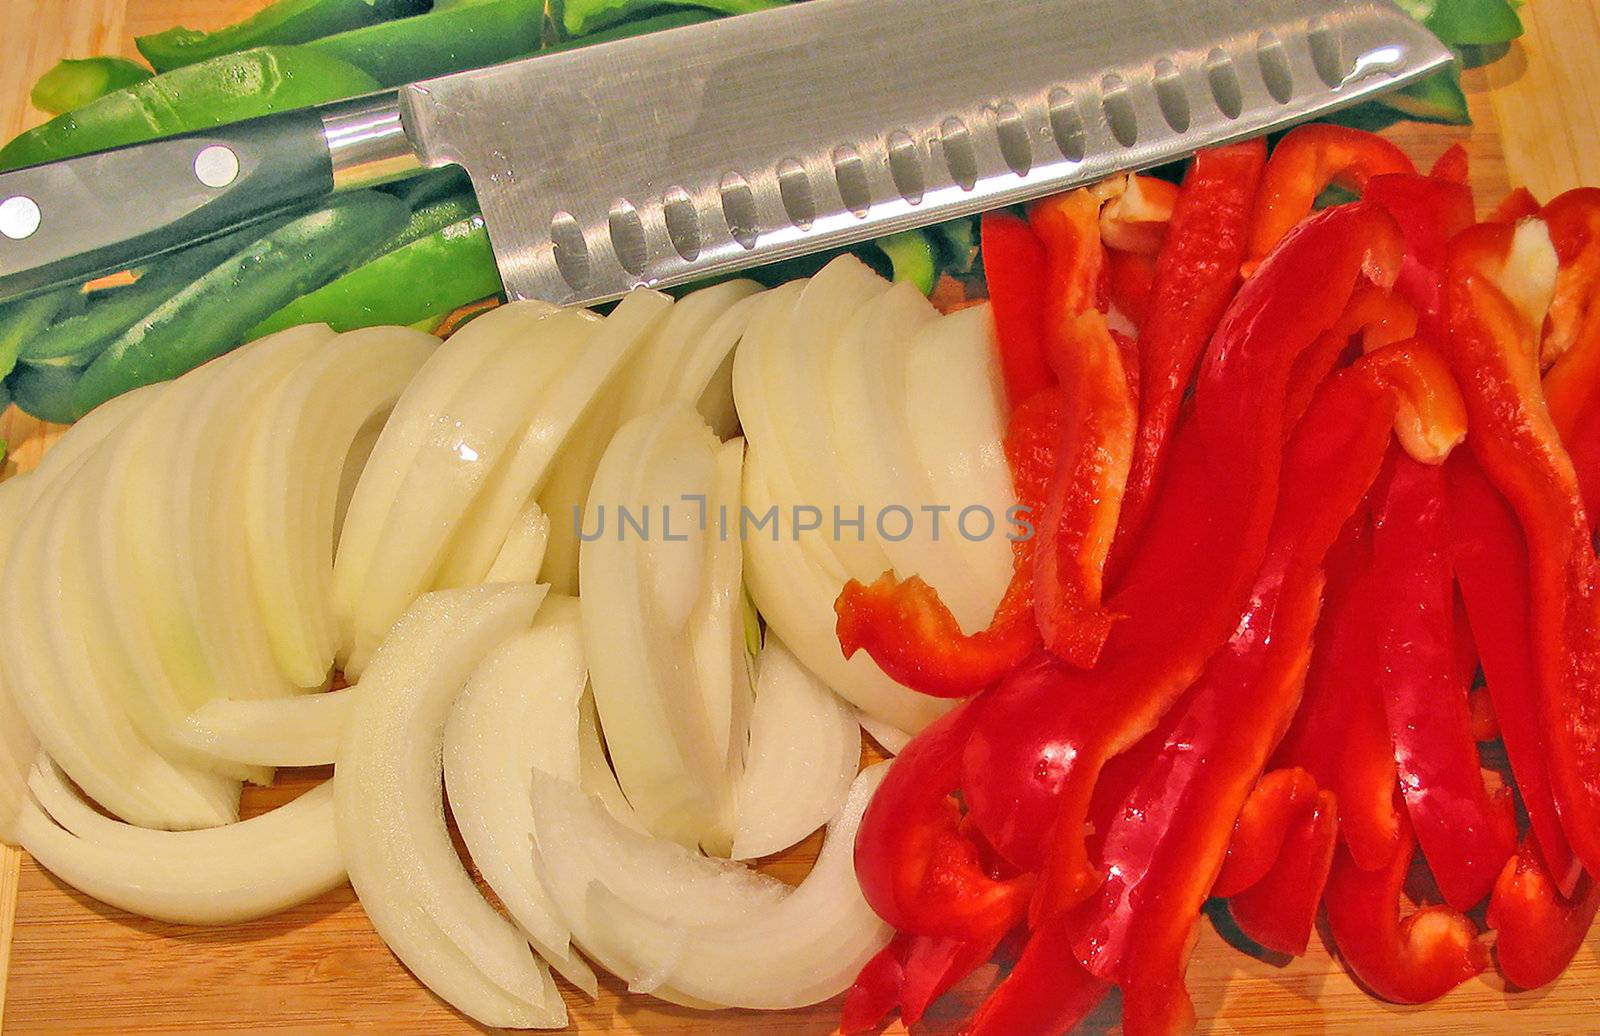 Sliced Vegetables with a Knife by KevinPanizza